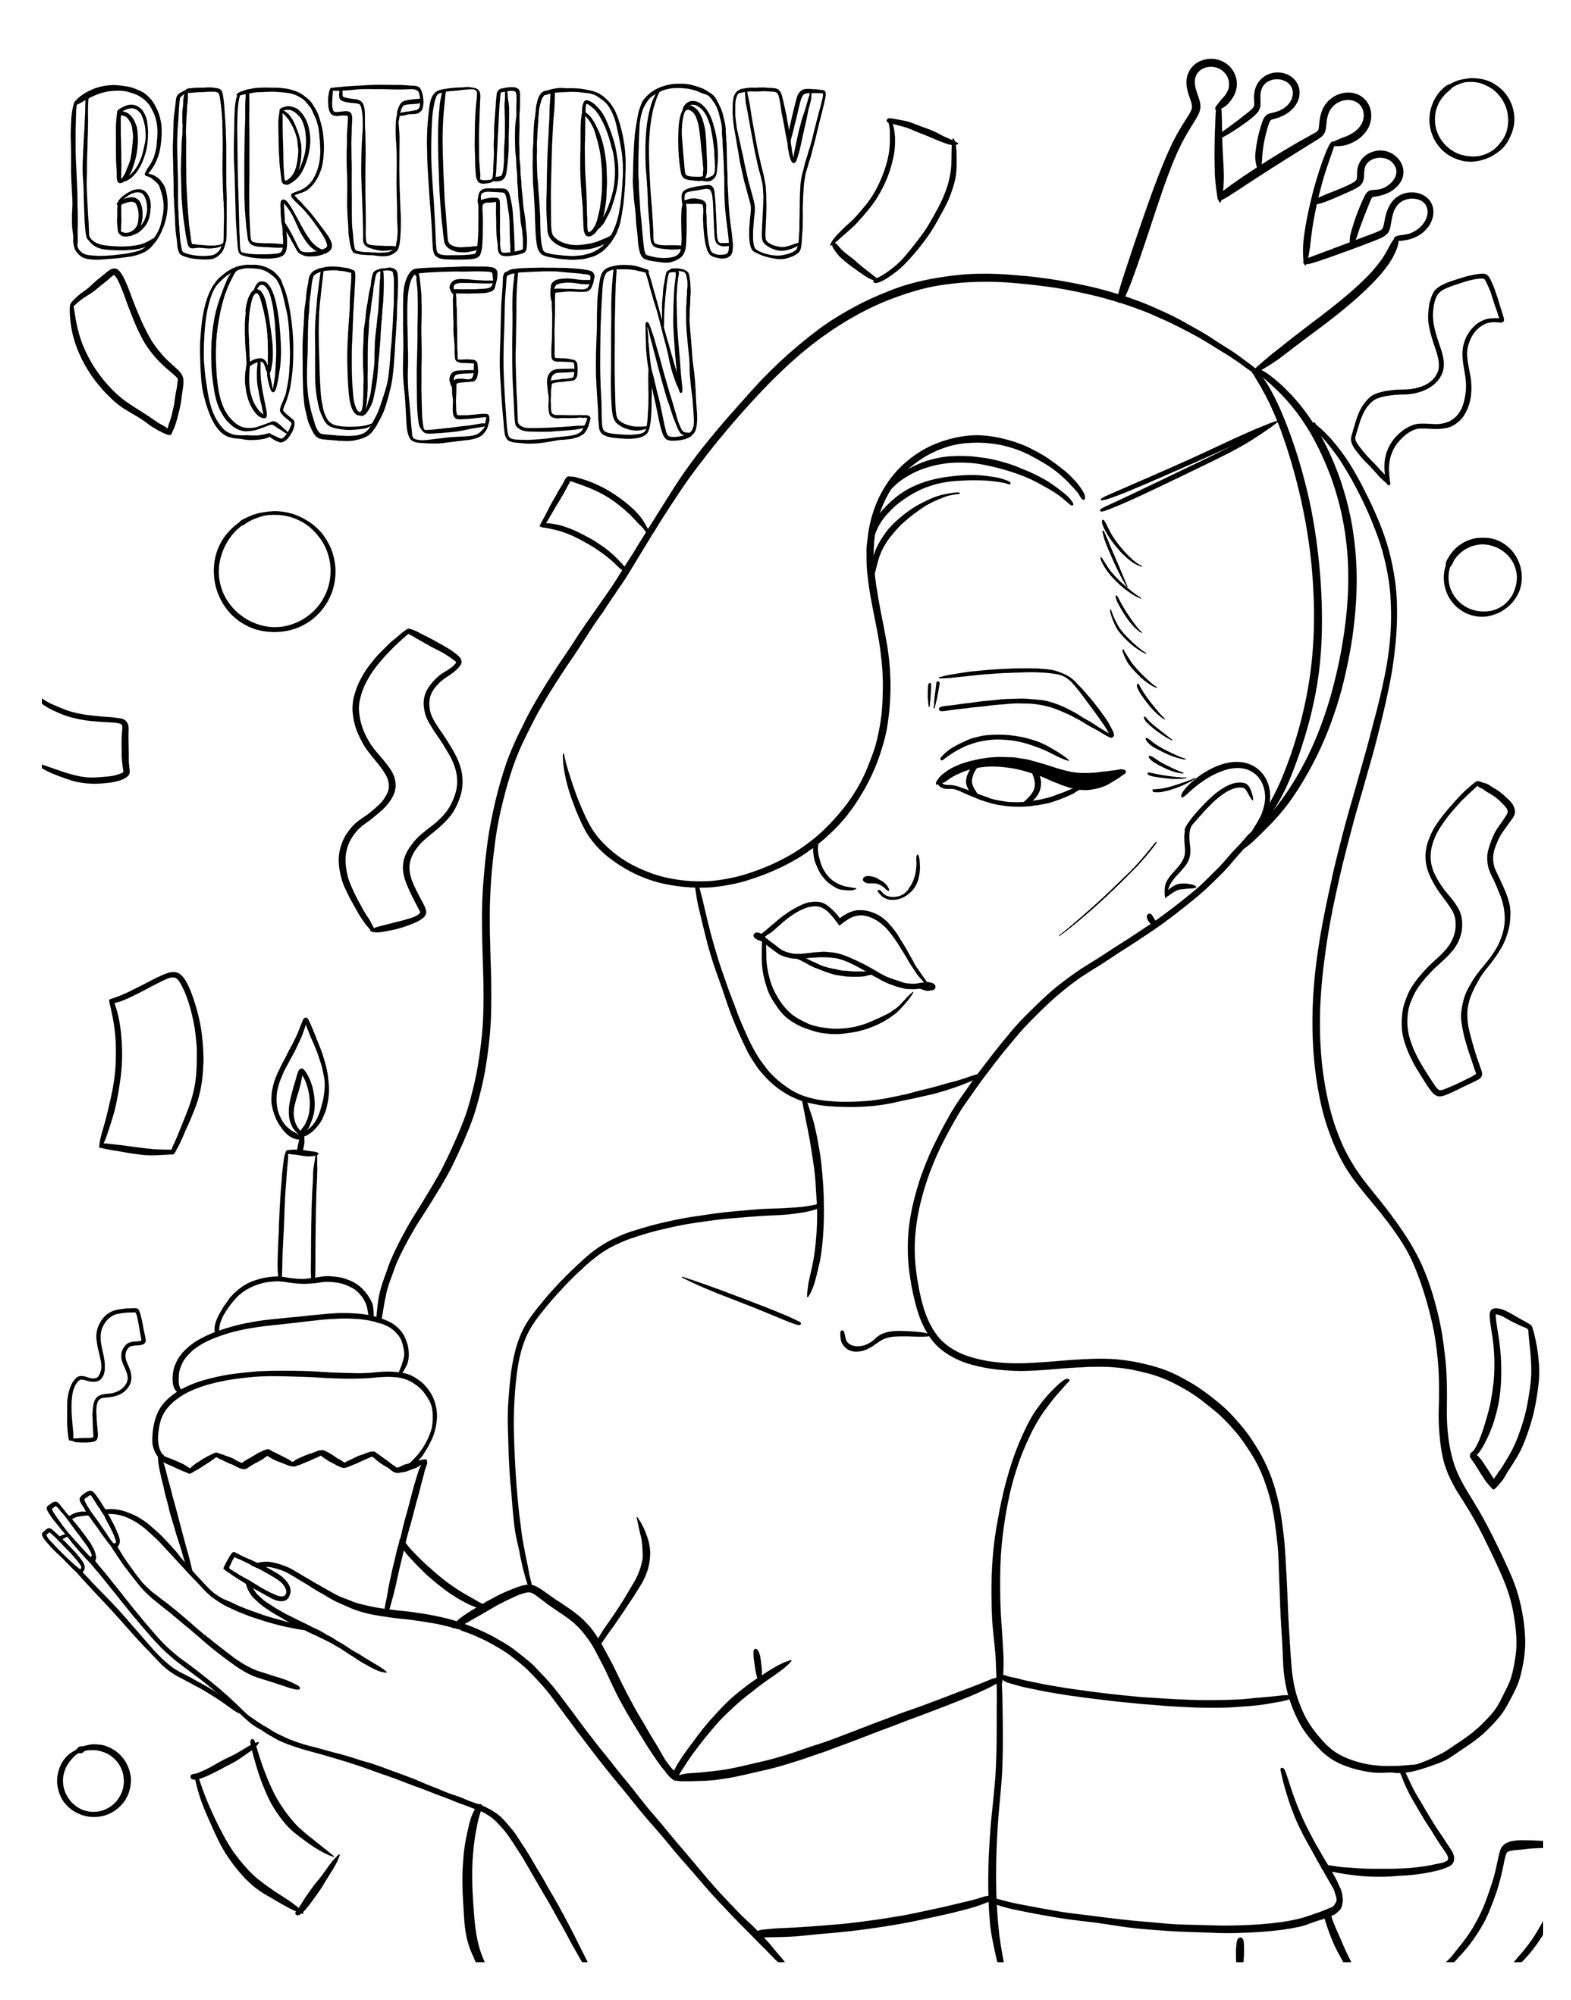 Birthday Queen DIY Paint Kit - Paint Your Queenly Celebration